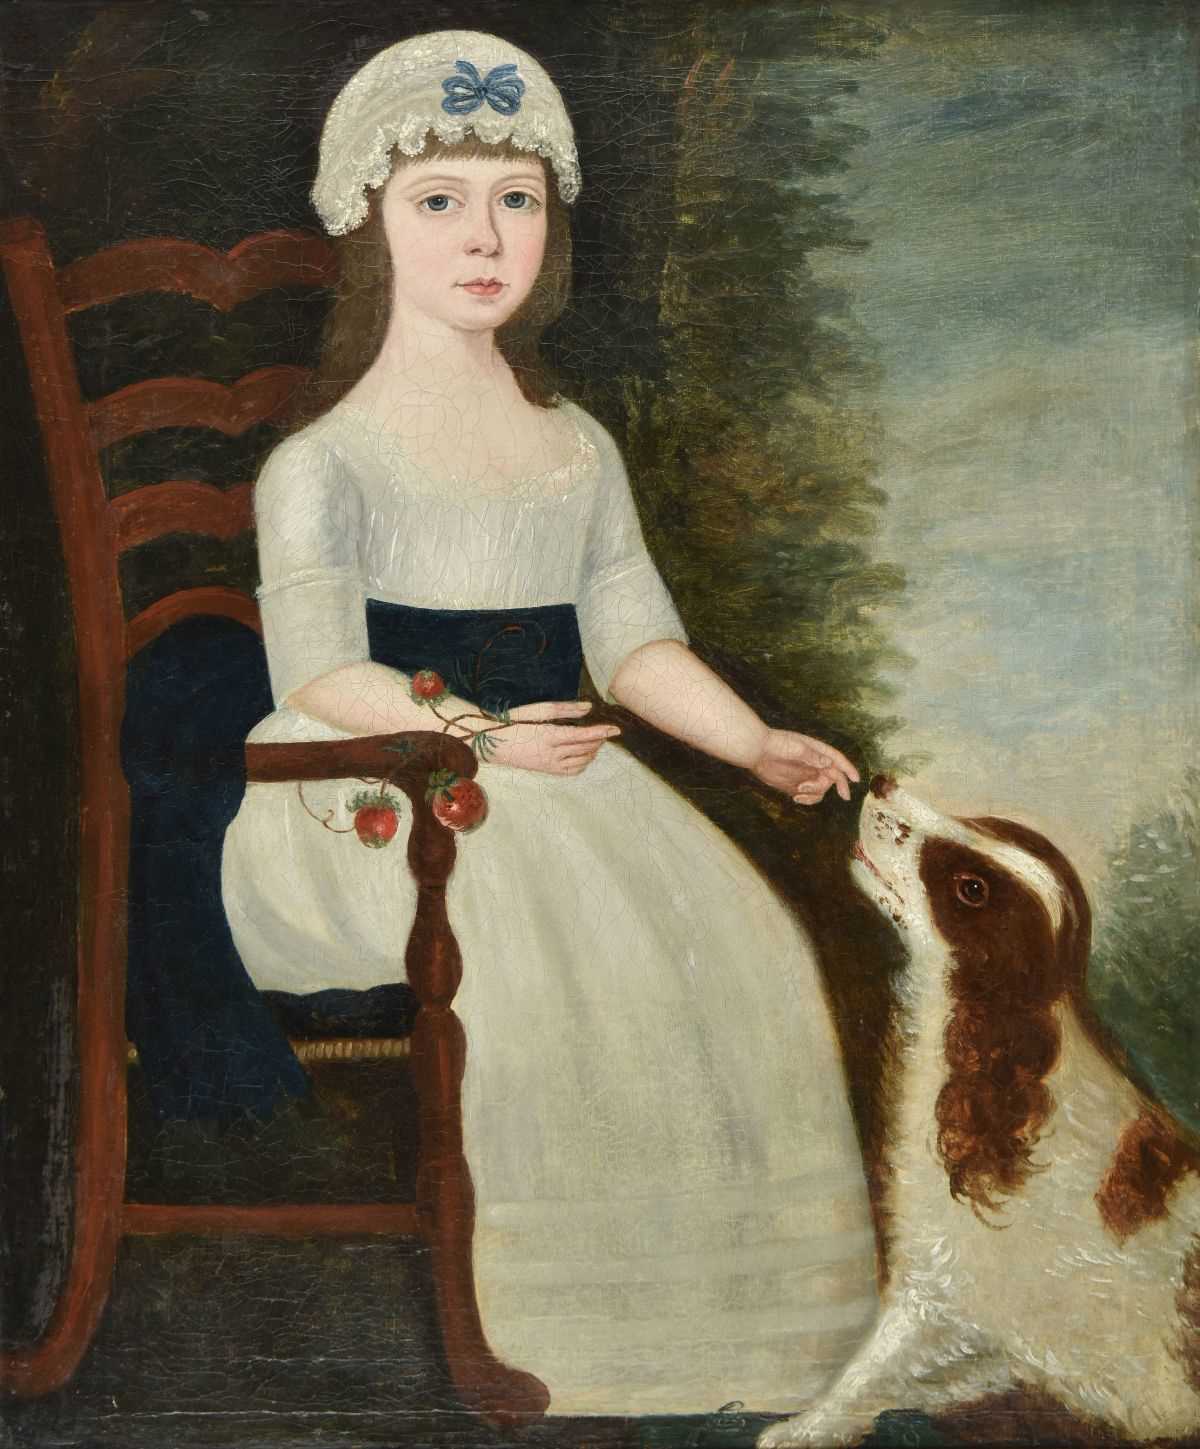 Lot 410 - Naive School. Portrait of a seated girl with spaniel, late 18th century